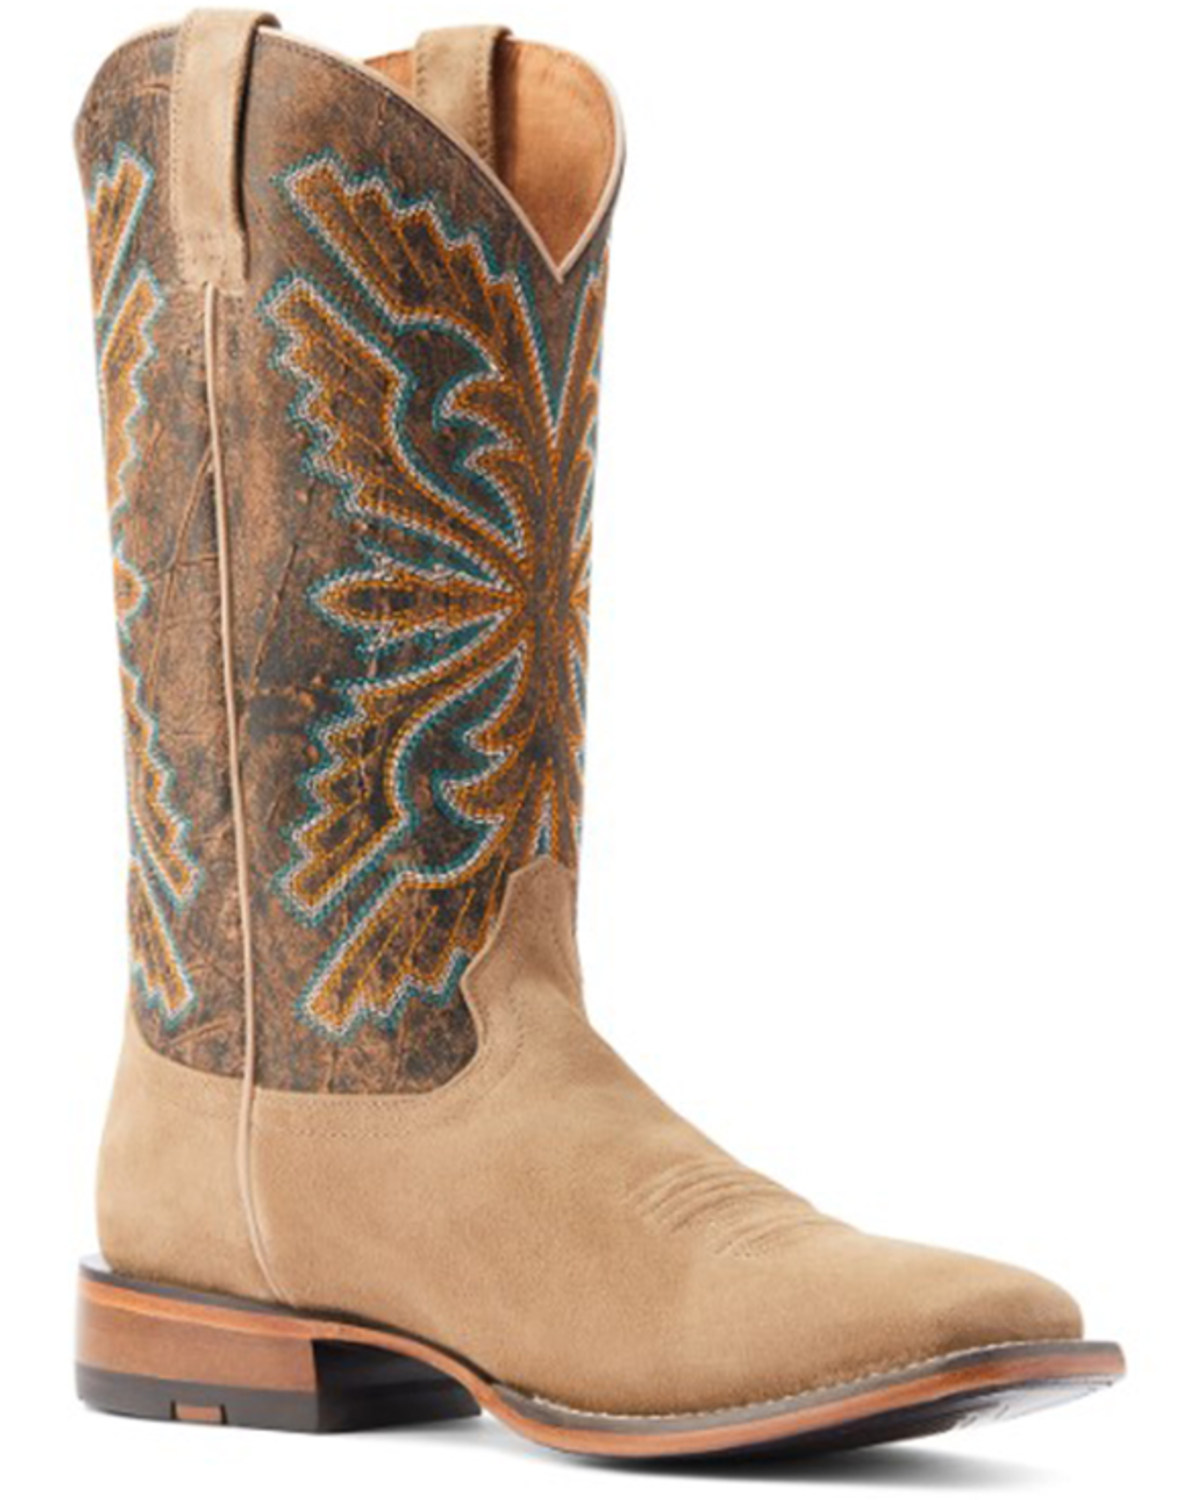 Ariat Men's Sting Western Boots